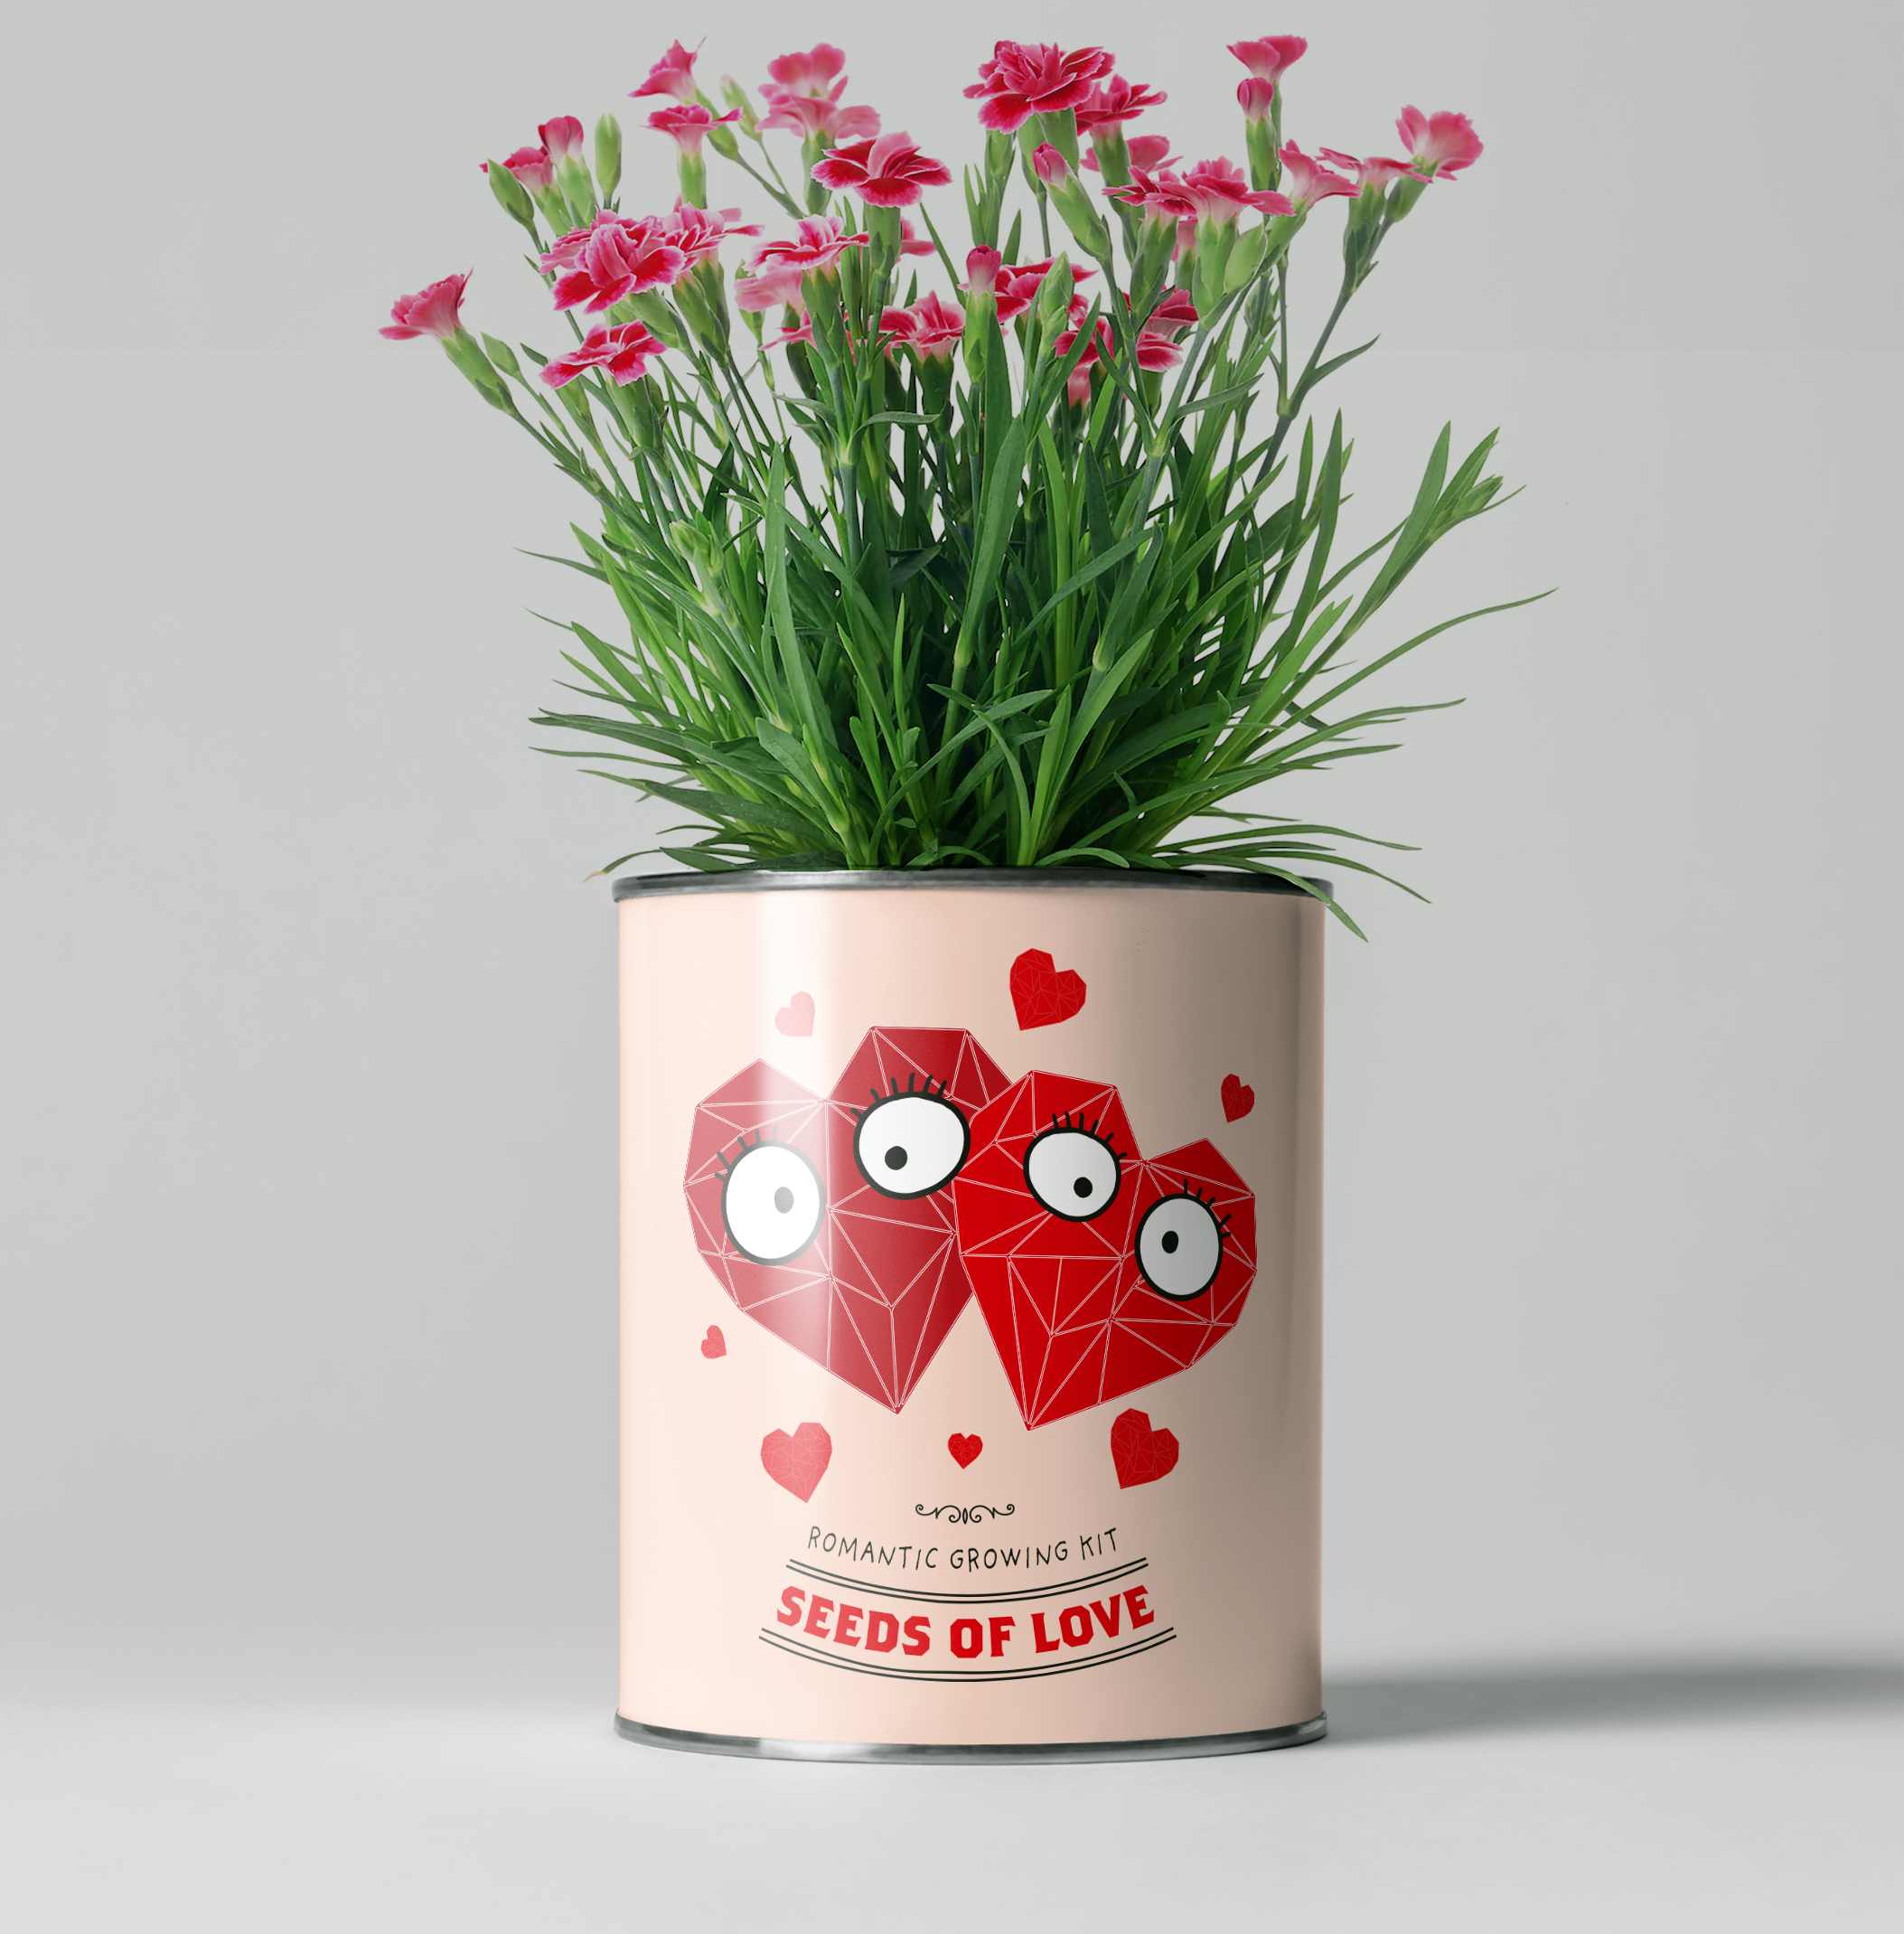 6 Unique Valentine's Day Gifts For Gardeners And Plant Lovers - Sow ʼn Sow